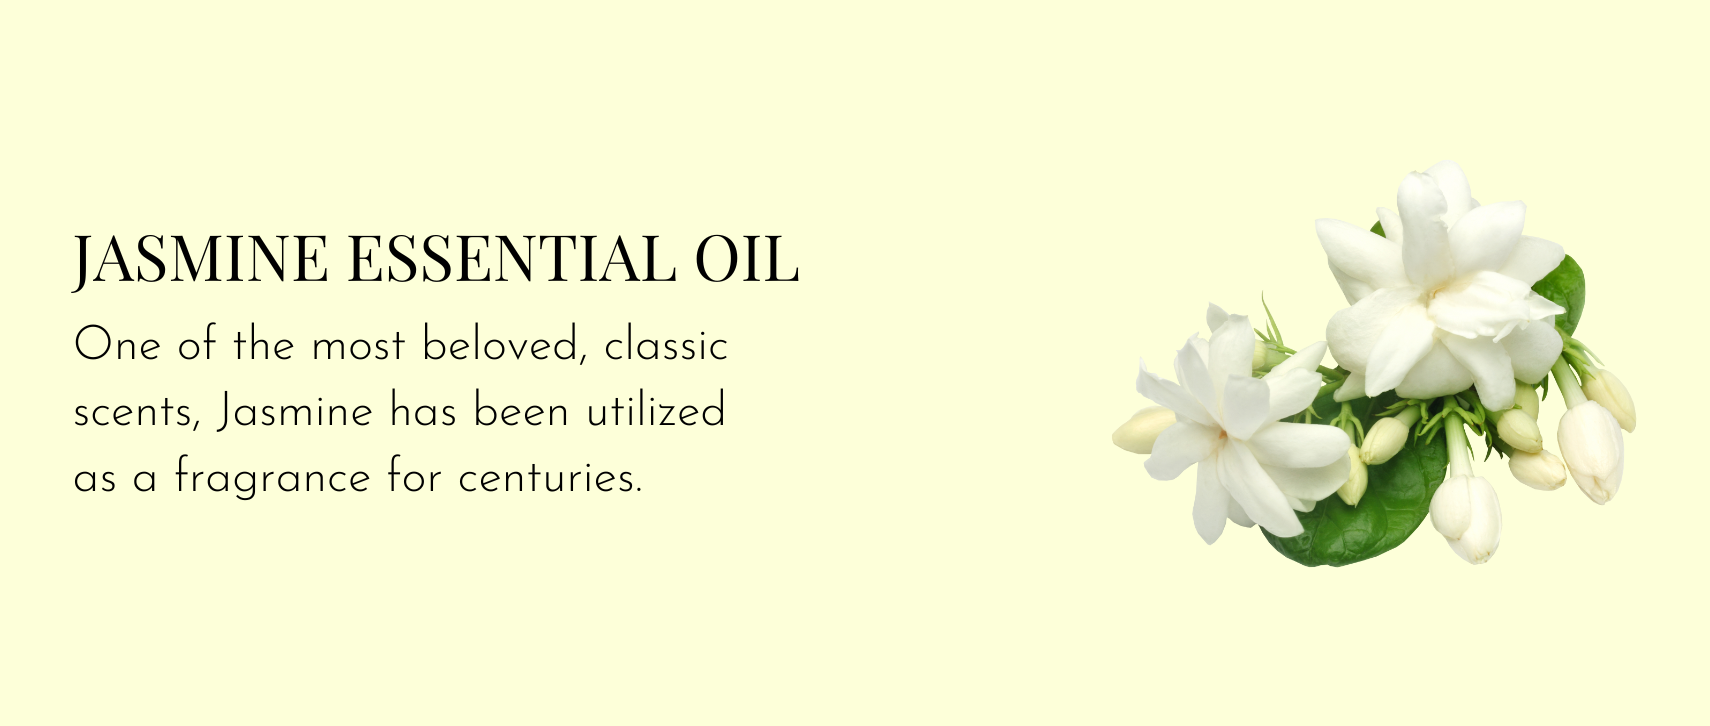 Jasmine Essential Oil – One of the most beloved, classic scents, Jasmine has been utilized as a fragrance for centuries.